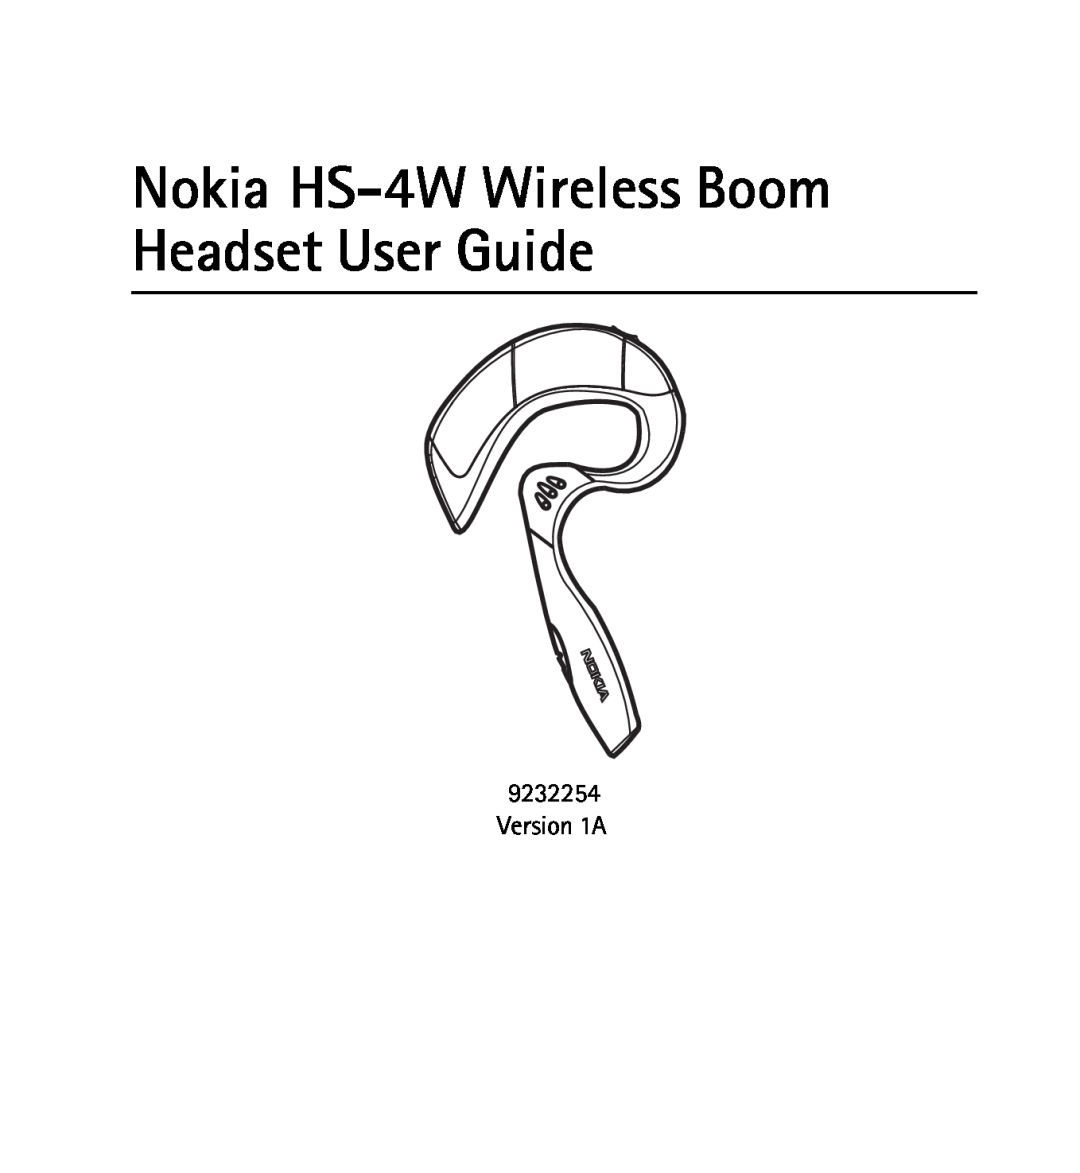 Nokia 9232254 manual Nokia HS-4WWireless Boom Headset User Guide, Version 1A 